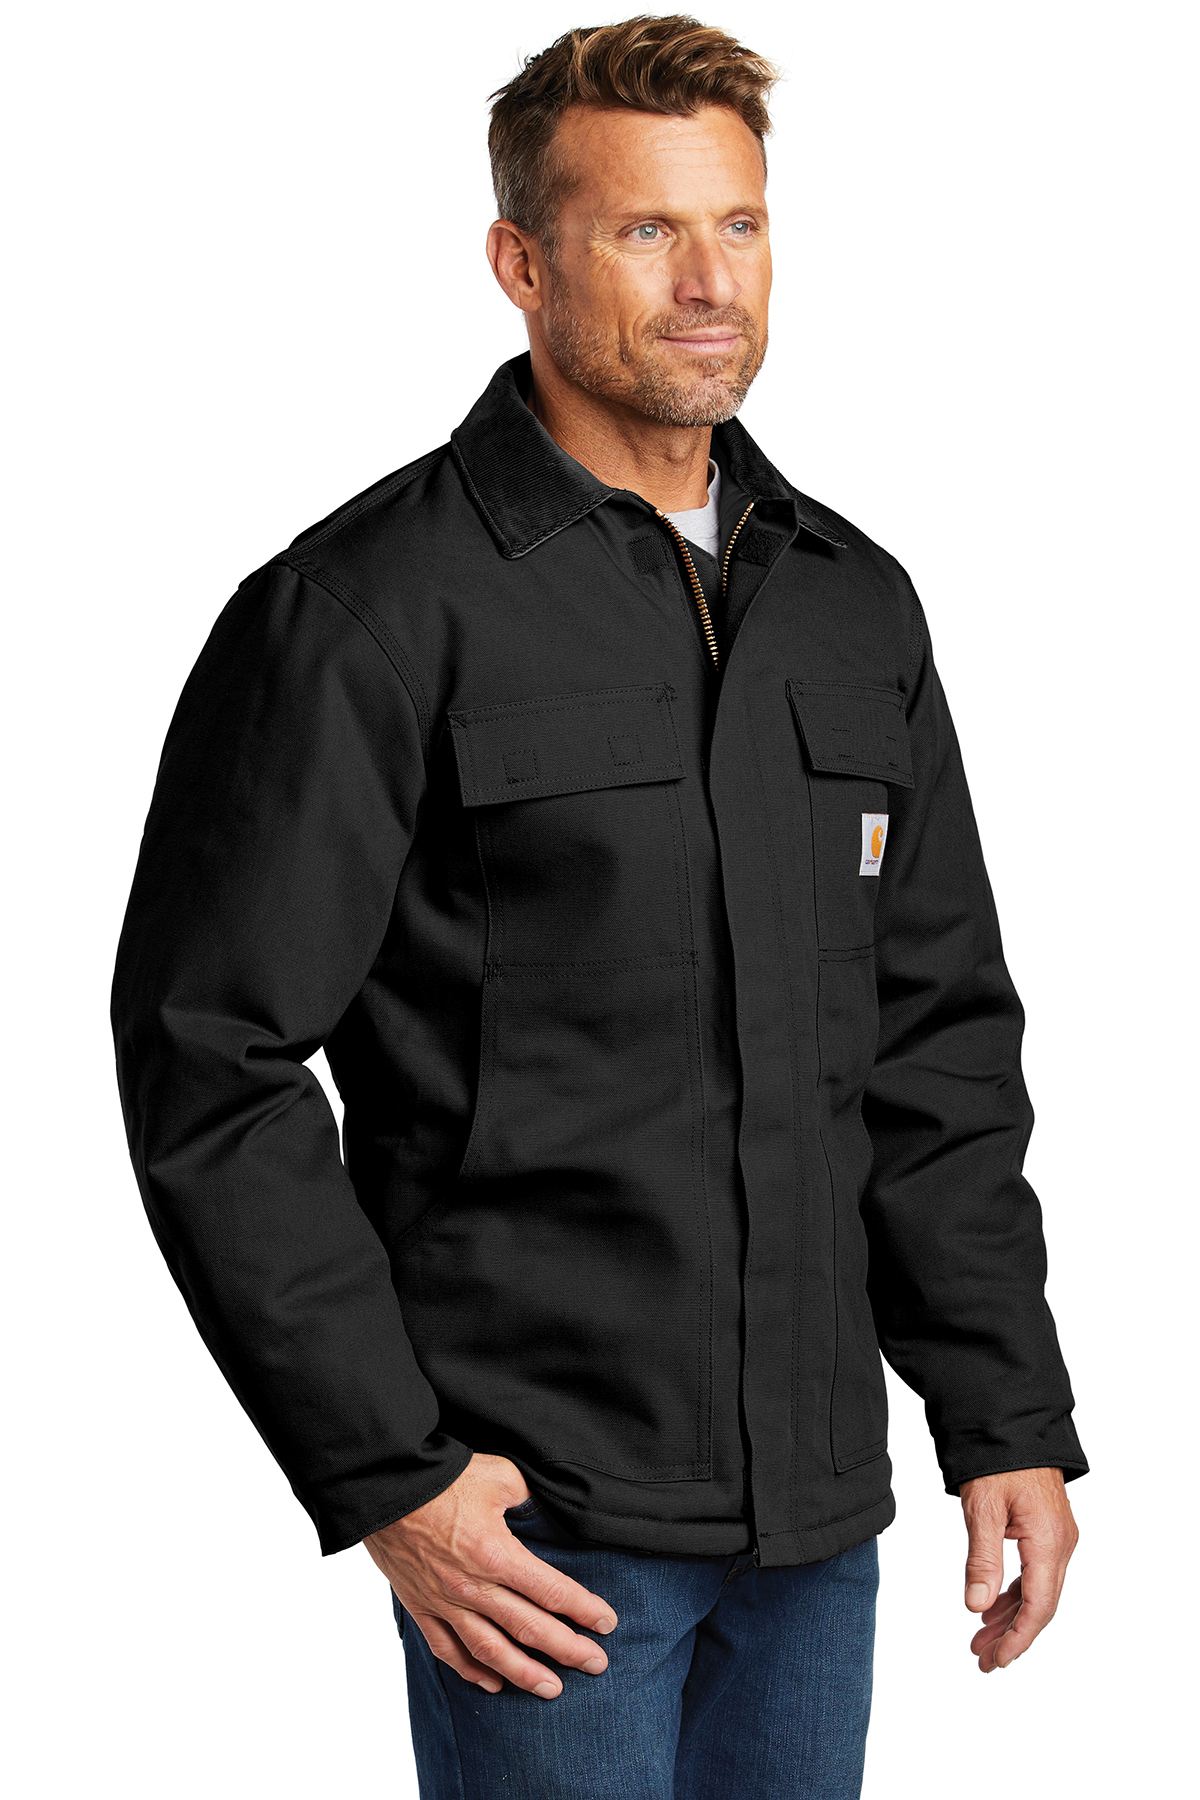 Carhartt Tall Duck Traditional Coat | Product | Company Casuals